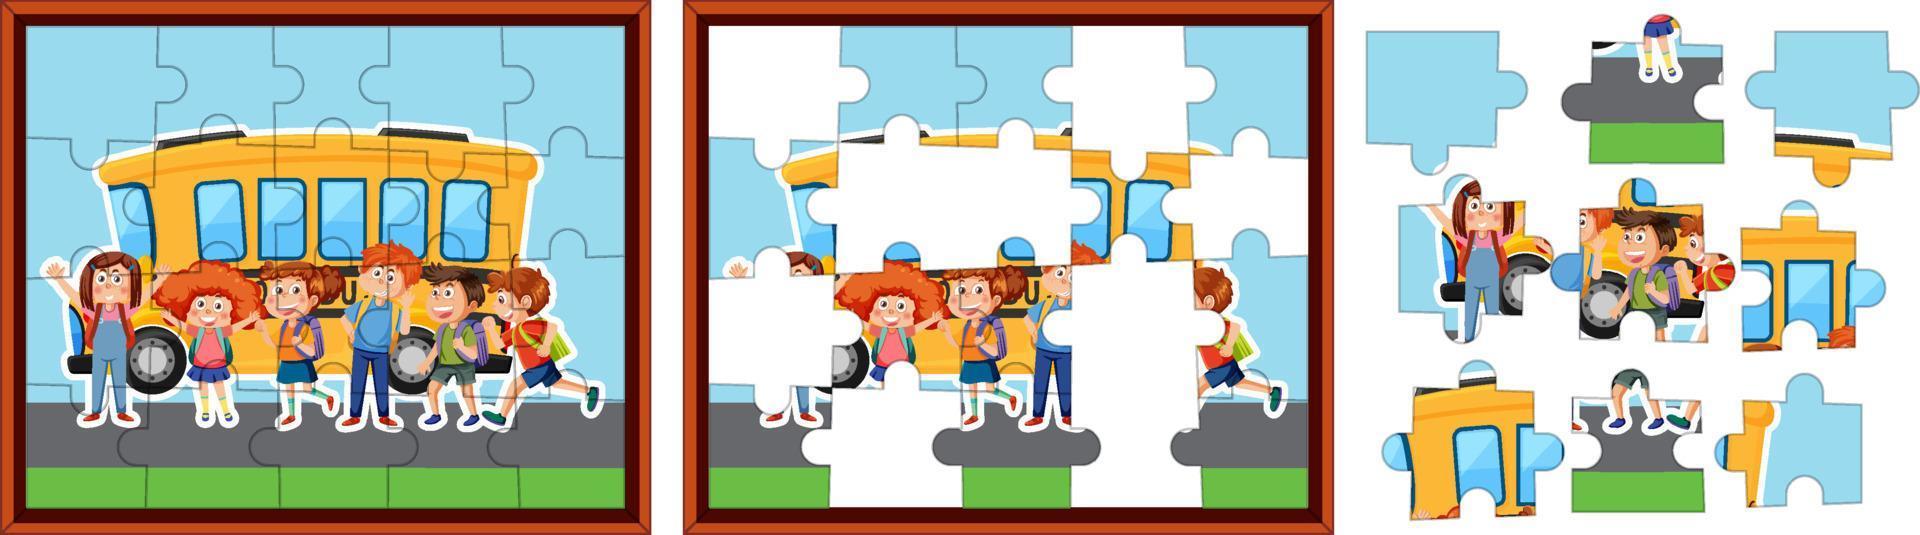 Student with school bus photo puzzle game template vector